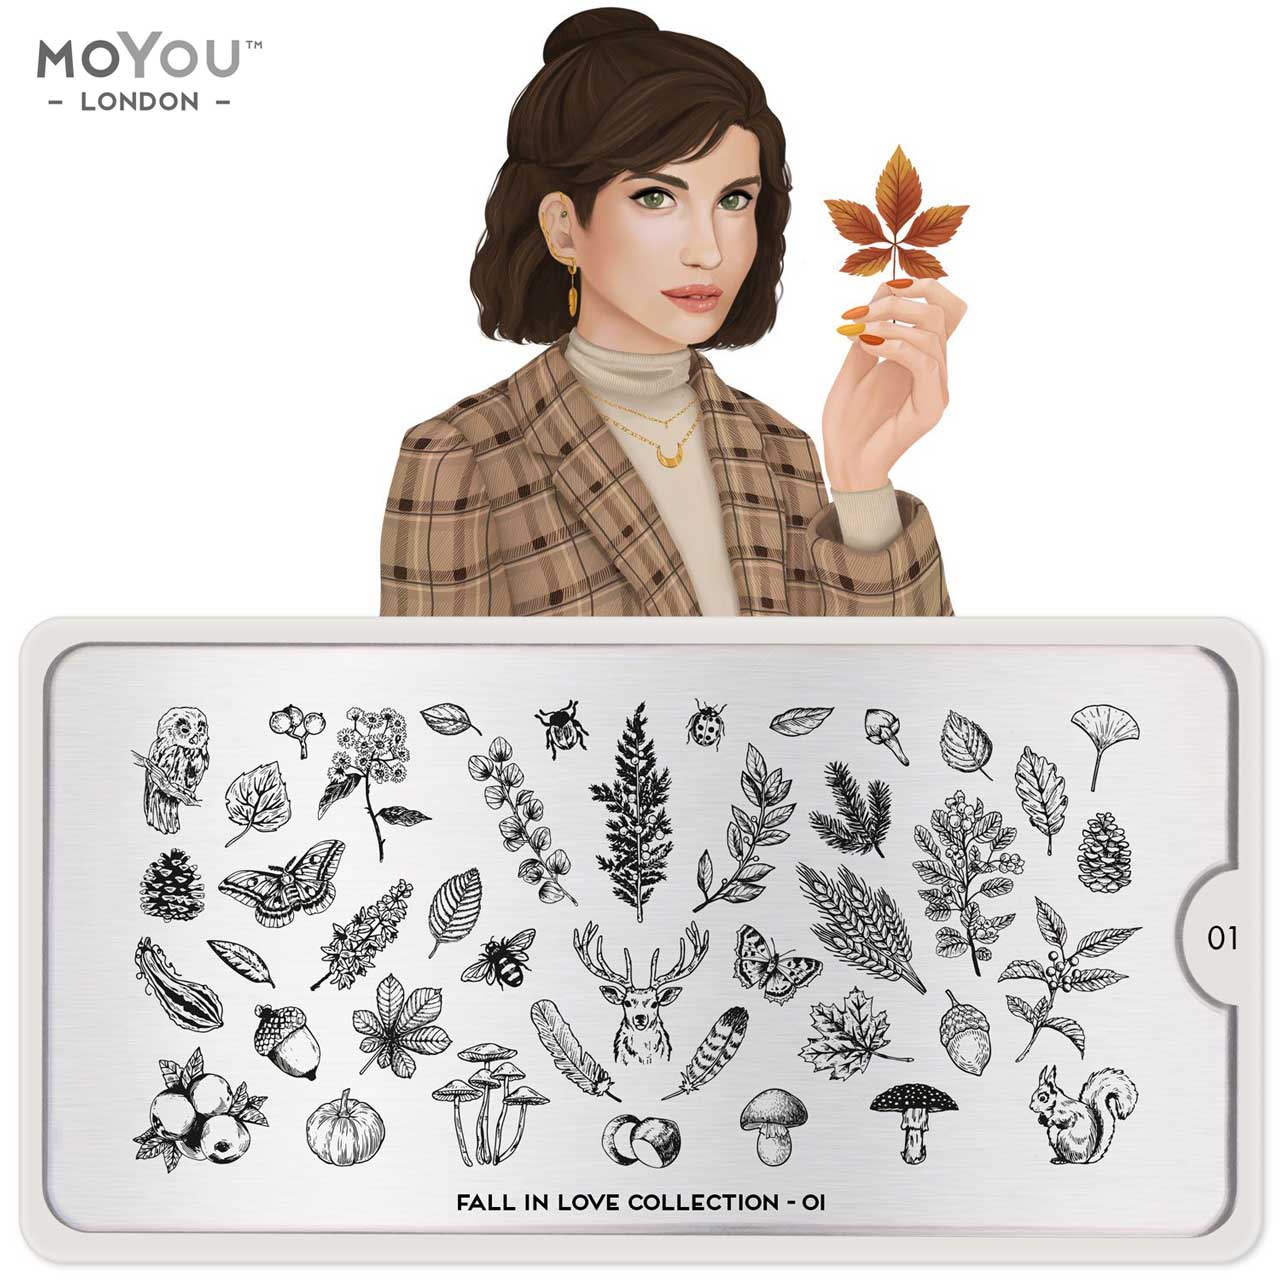 Plaque Stamping Fall in love 01 - MoYou London